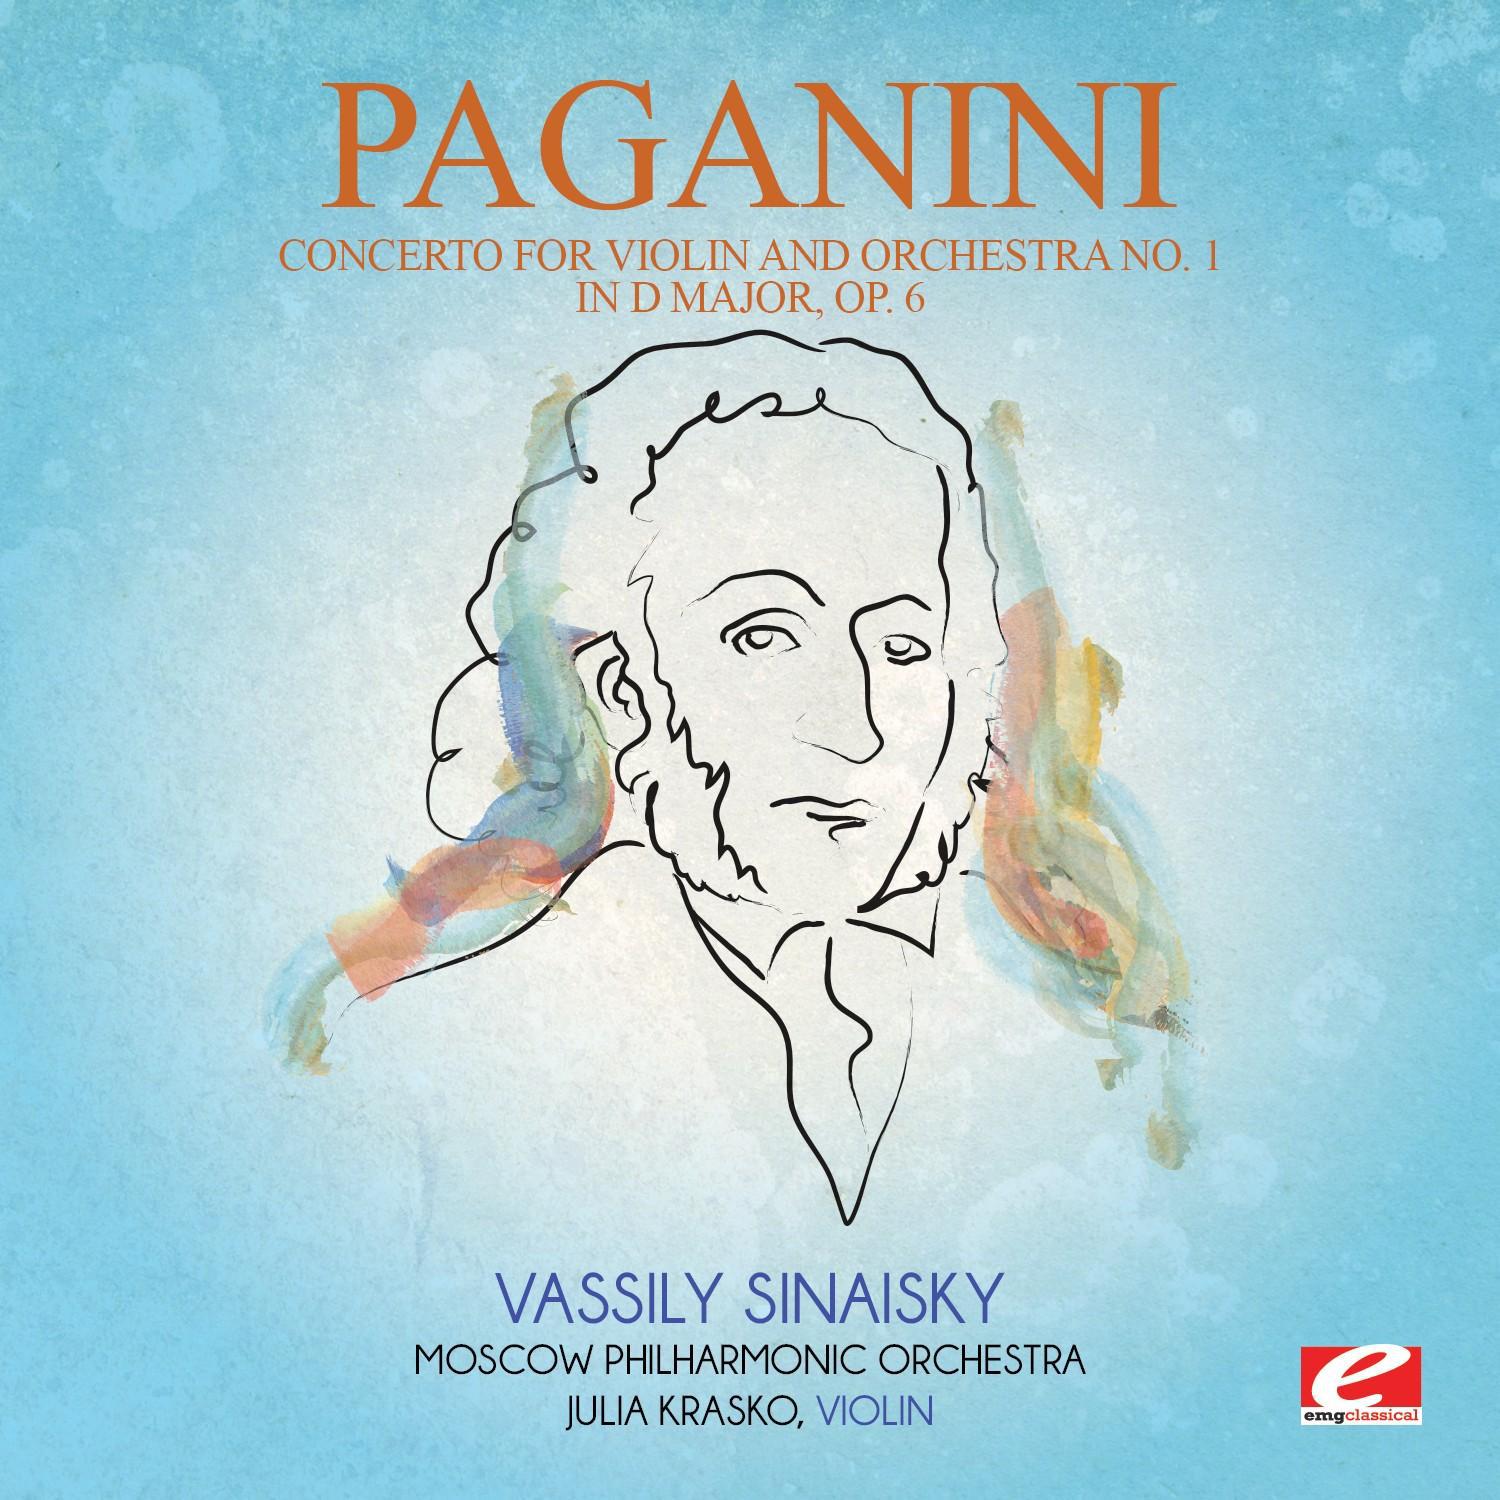 Paganini: Concerto for Violin and Orchestra No. 1 in D Major, Op. 6 (Digitally Remastered)